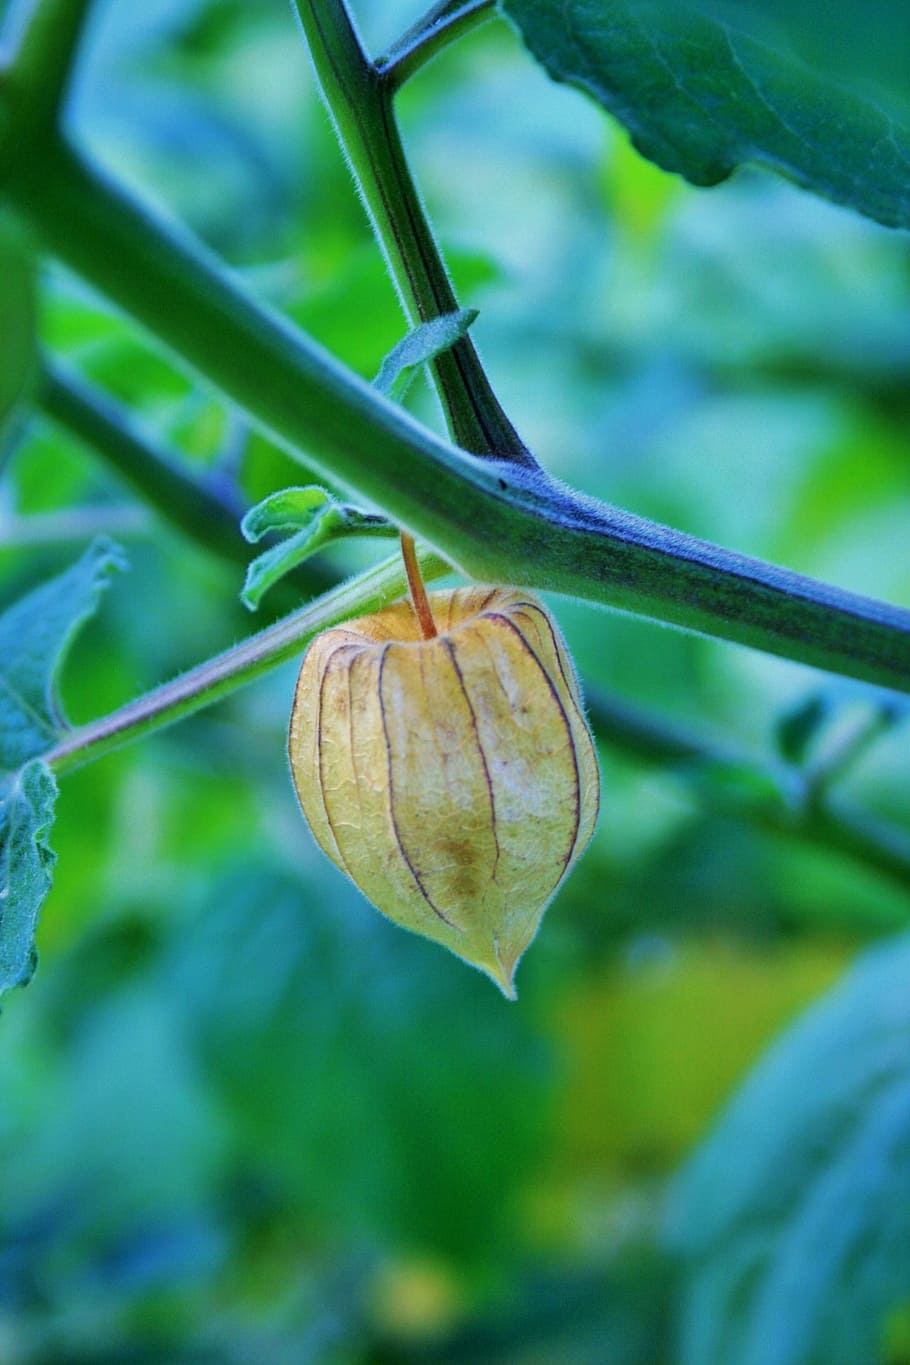 fruit, ripe, cape gooseberry, cape, bleached, plant, close-up, focus on foreground, growth, plant part